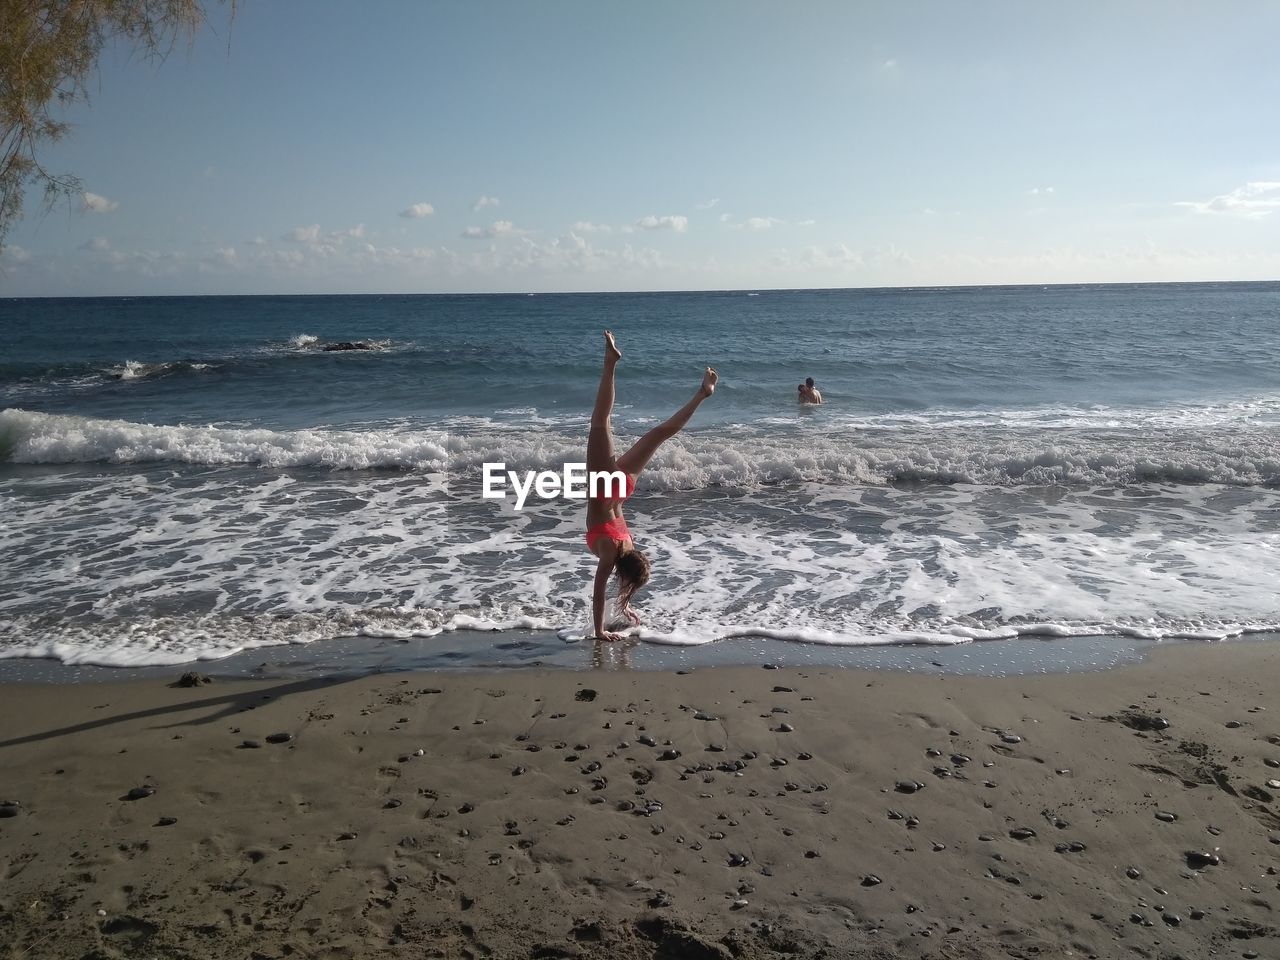 Woman doing handstand at beach against sky